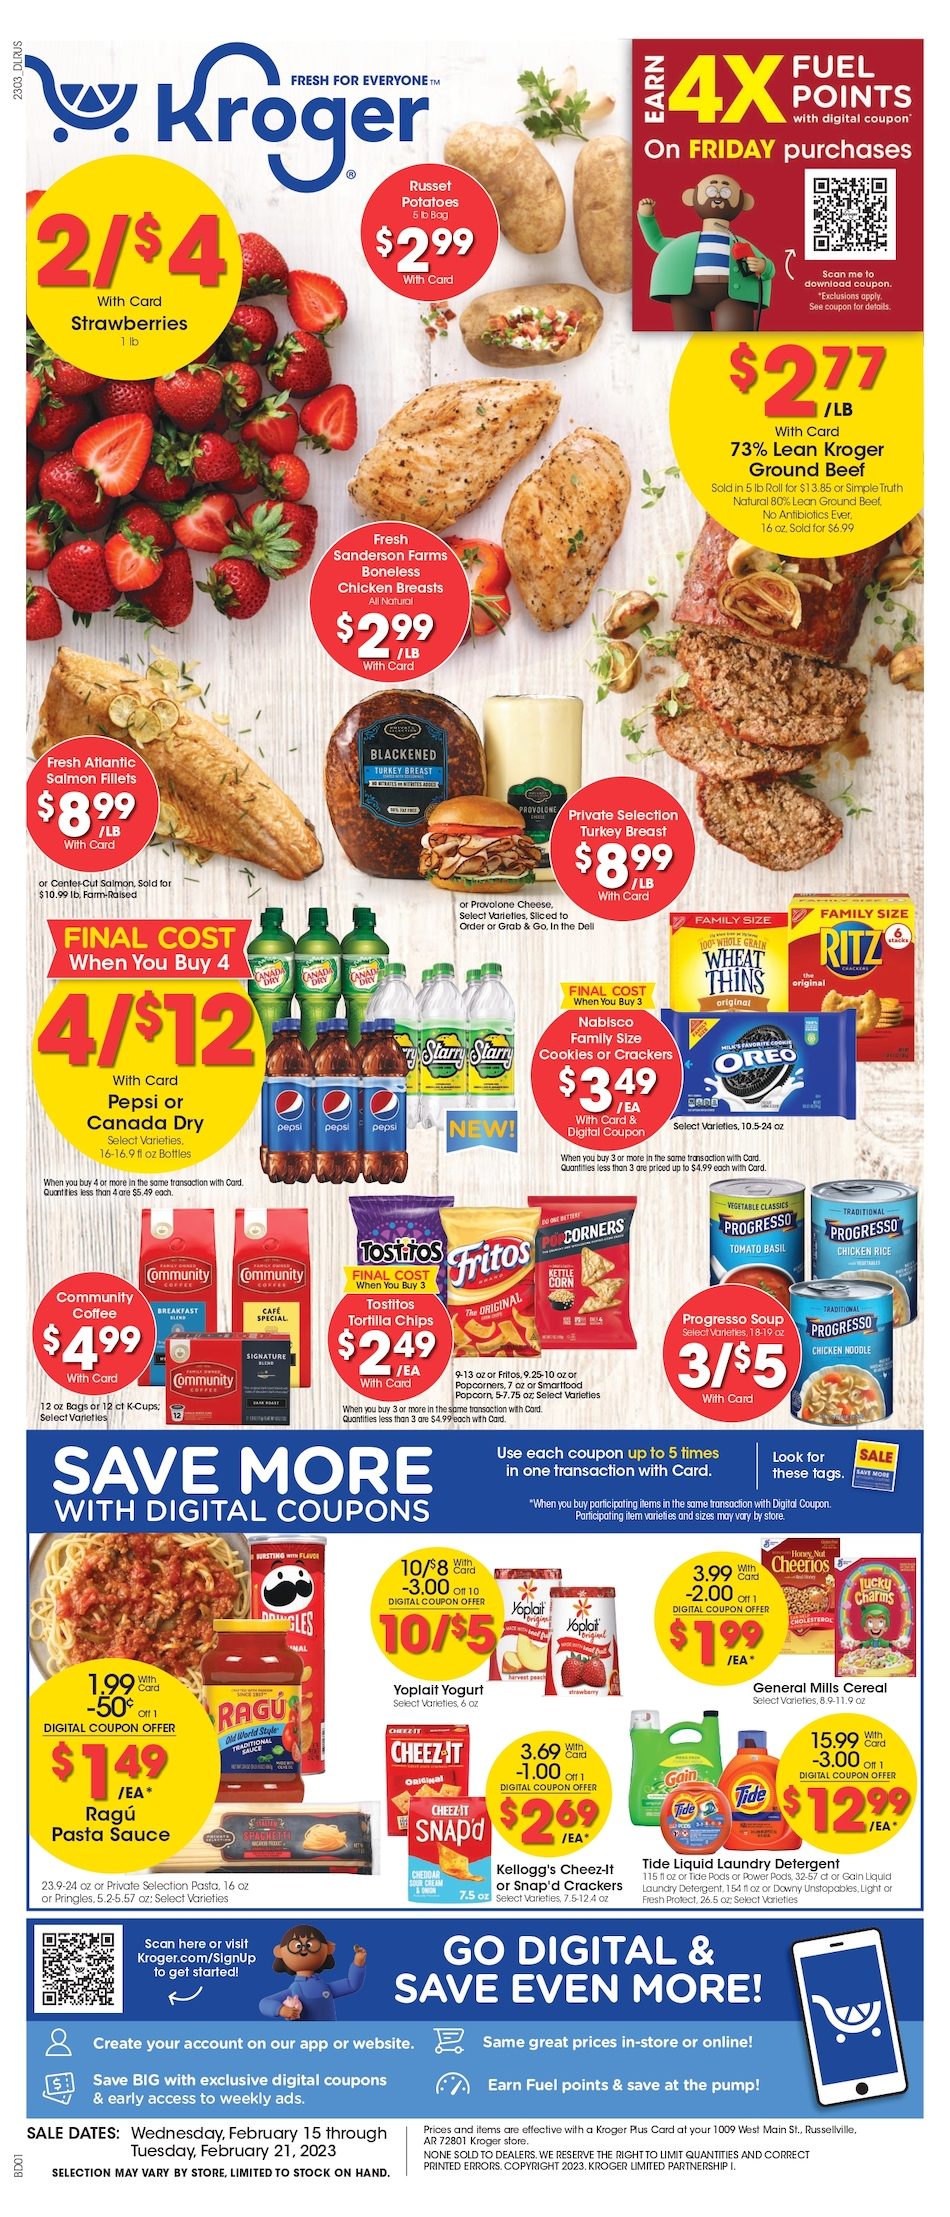 Kroger Weekly Ad 15th  – 21st February 2023 Page 1